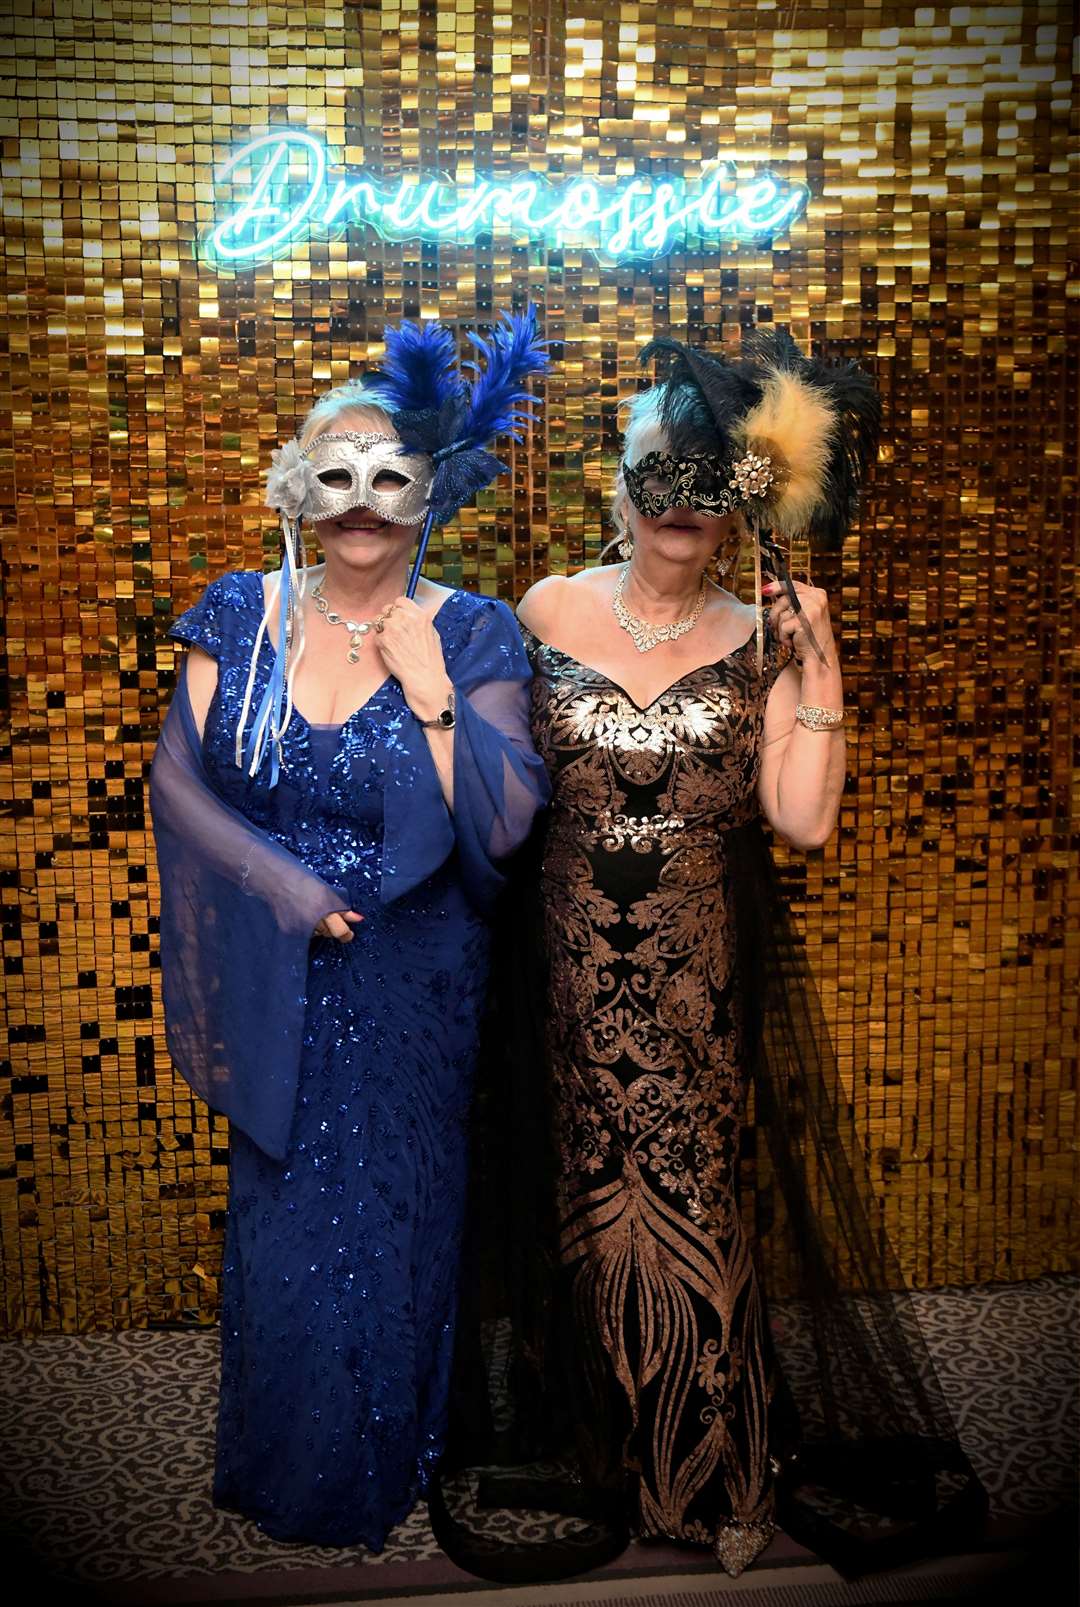 Glamorous attendees of the ball.